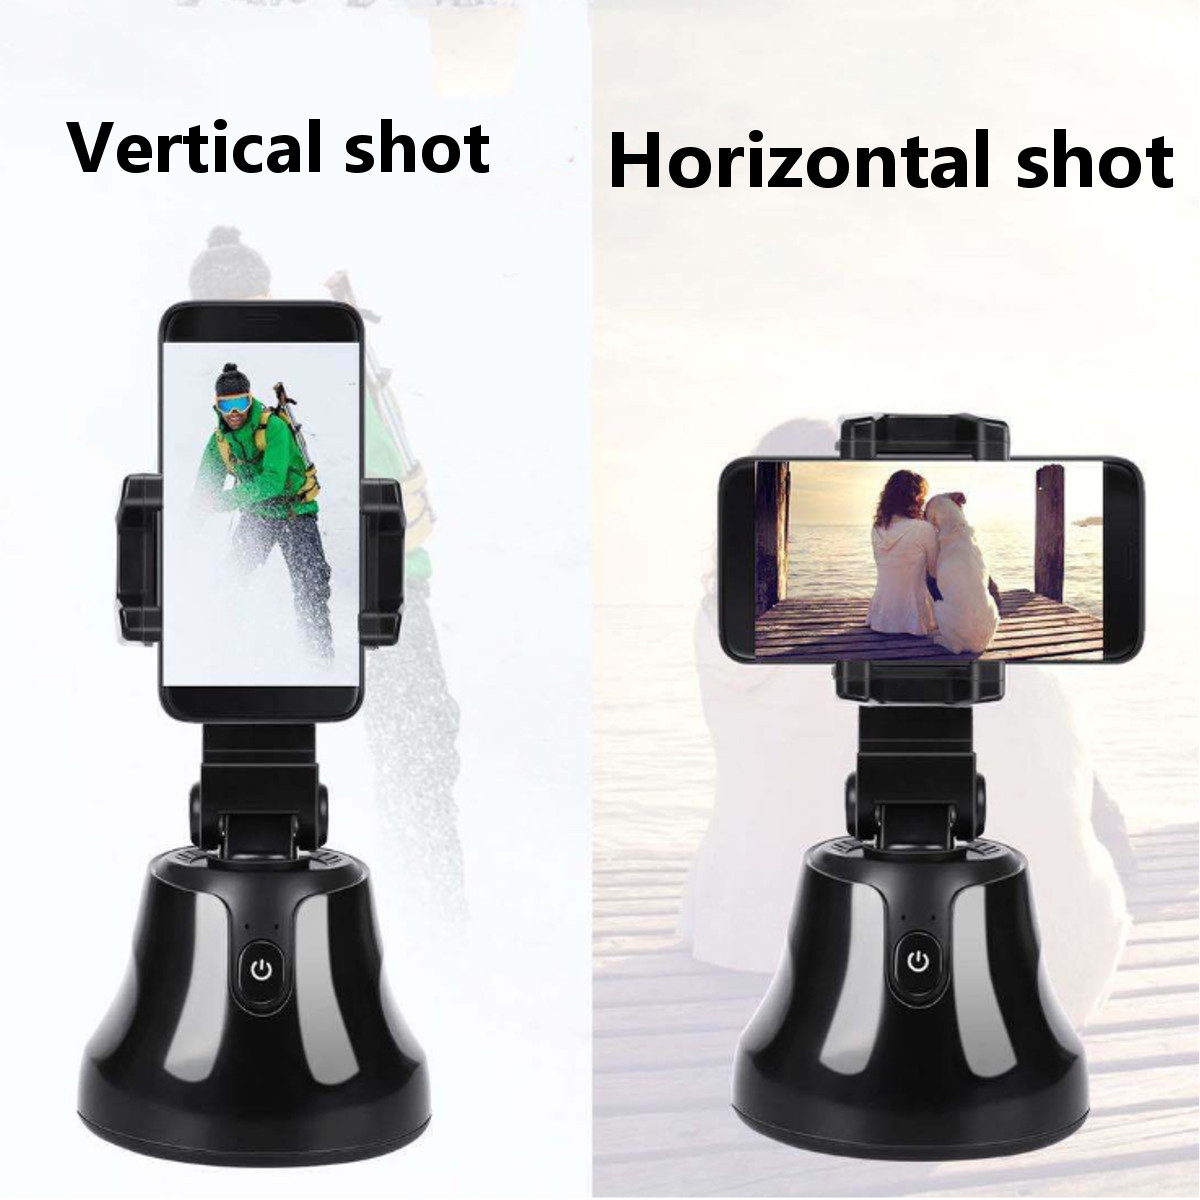 Auto-Smart-Shooting-Selfie-Stick-Intelligent-Gimbal-Object-Tracking-Phone-Holder-For-56-100mm-Phones-1675462-11